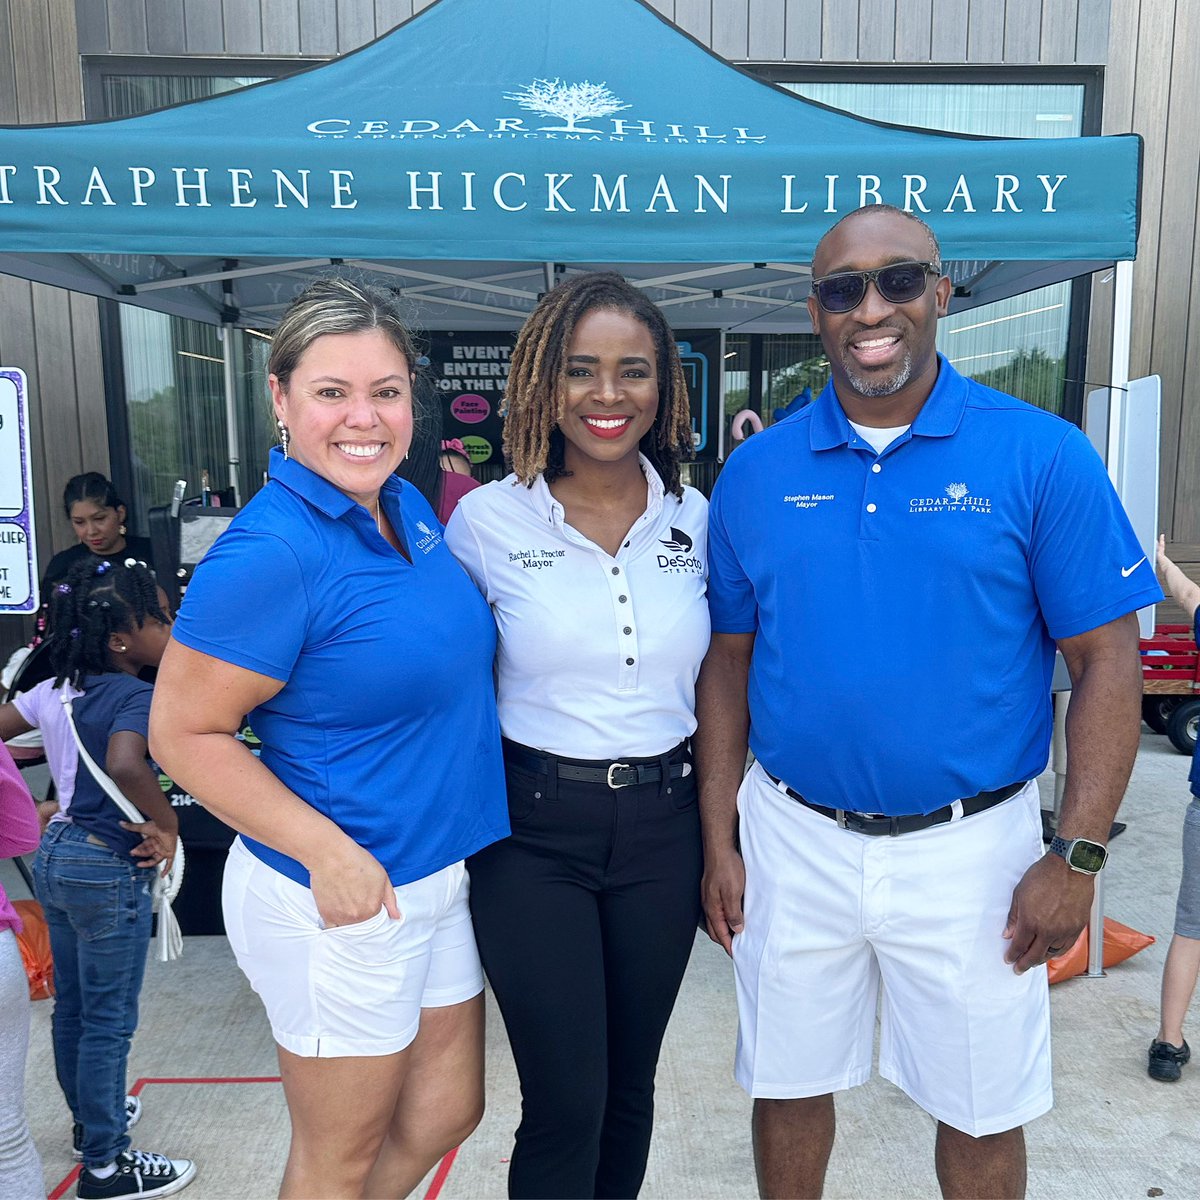 Spent part of the day with my friends, Mayor Stephen Mason and the First Lady of @CedarHillTX for their Grand Opening Celebration at Traphene Hickman Library, Cedar Hill Museum, and Signature Park! What an asset this is to the Best Southwest! Together WE Rise, Mayor Rachel